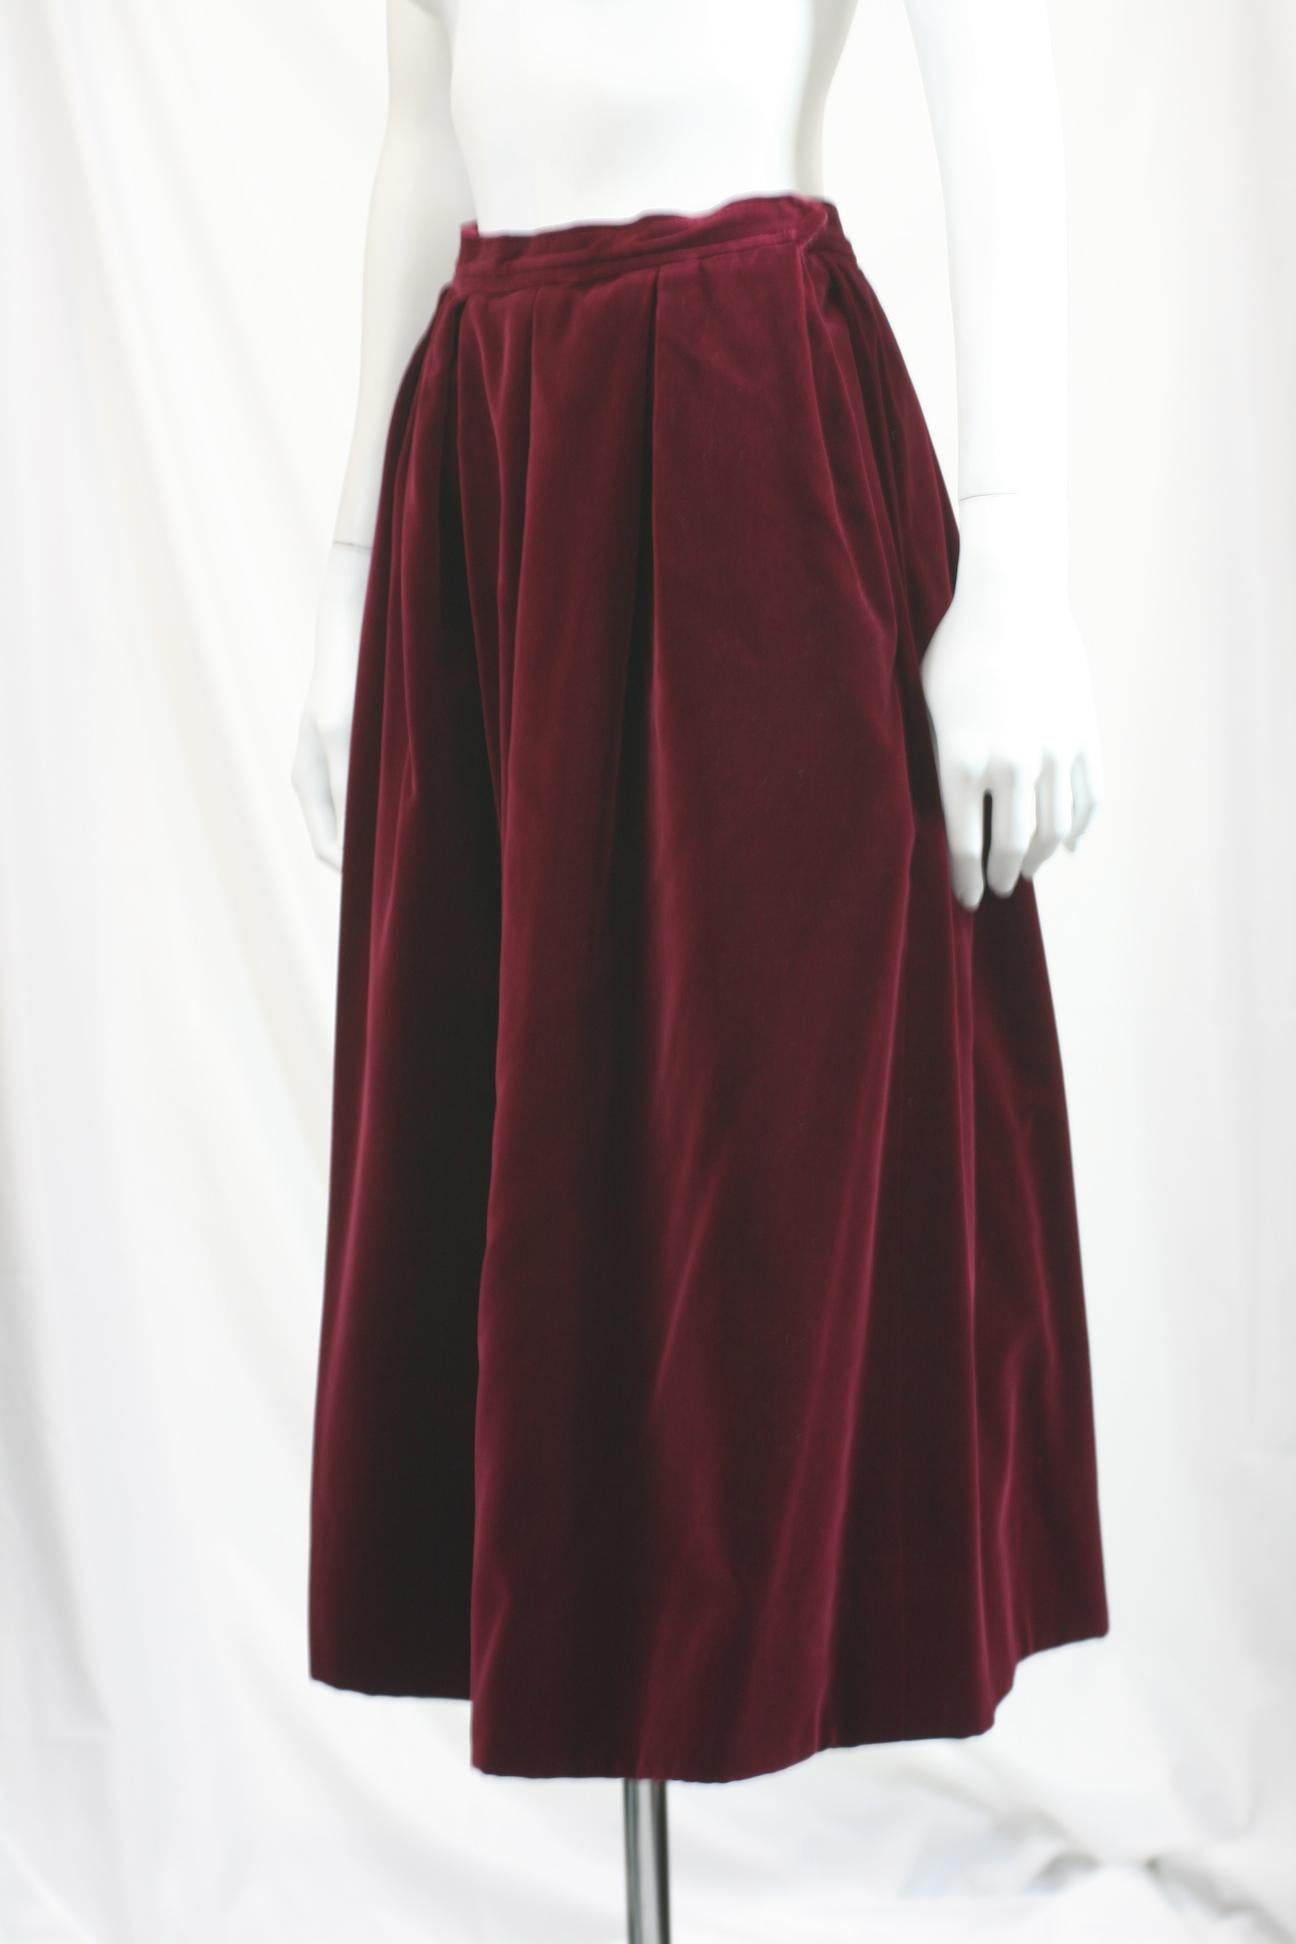 Yves Saint Laurent Claret Wine Cotton-rayon Velvet Skirt, easy construction with a series of inverted pleats which release from waist  to fullness at hem. Side zip closure and practical YSL side pockets as well. A timeless classic, likely from the